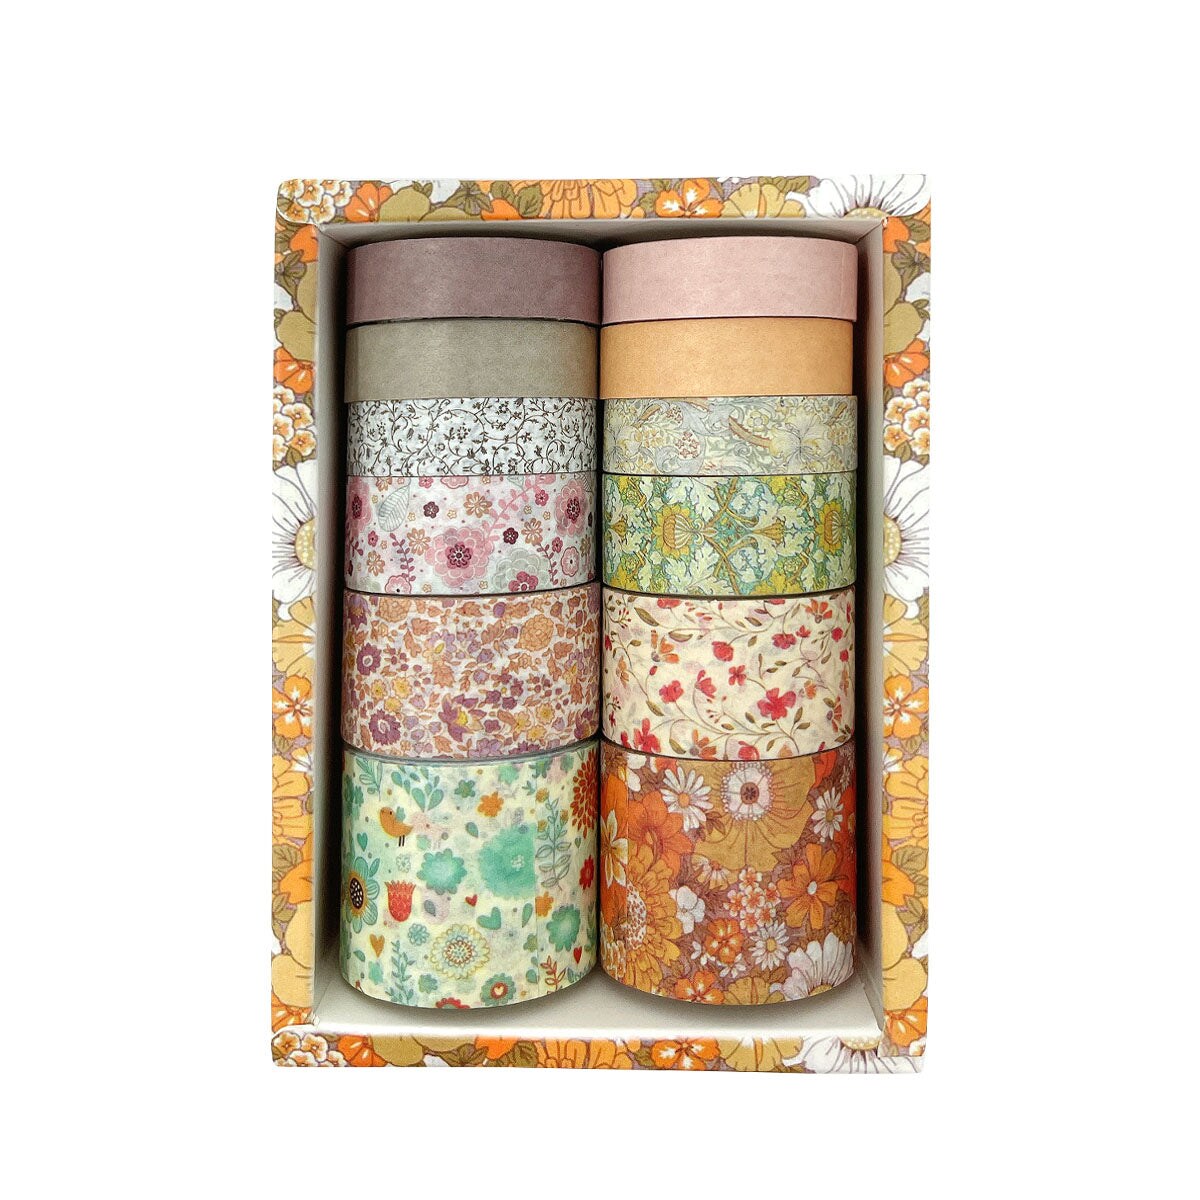 Craft Journal Tape, Washi Tape, Durable Without Leaving Any